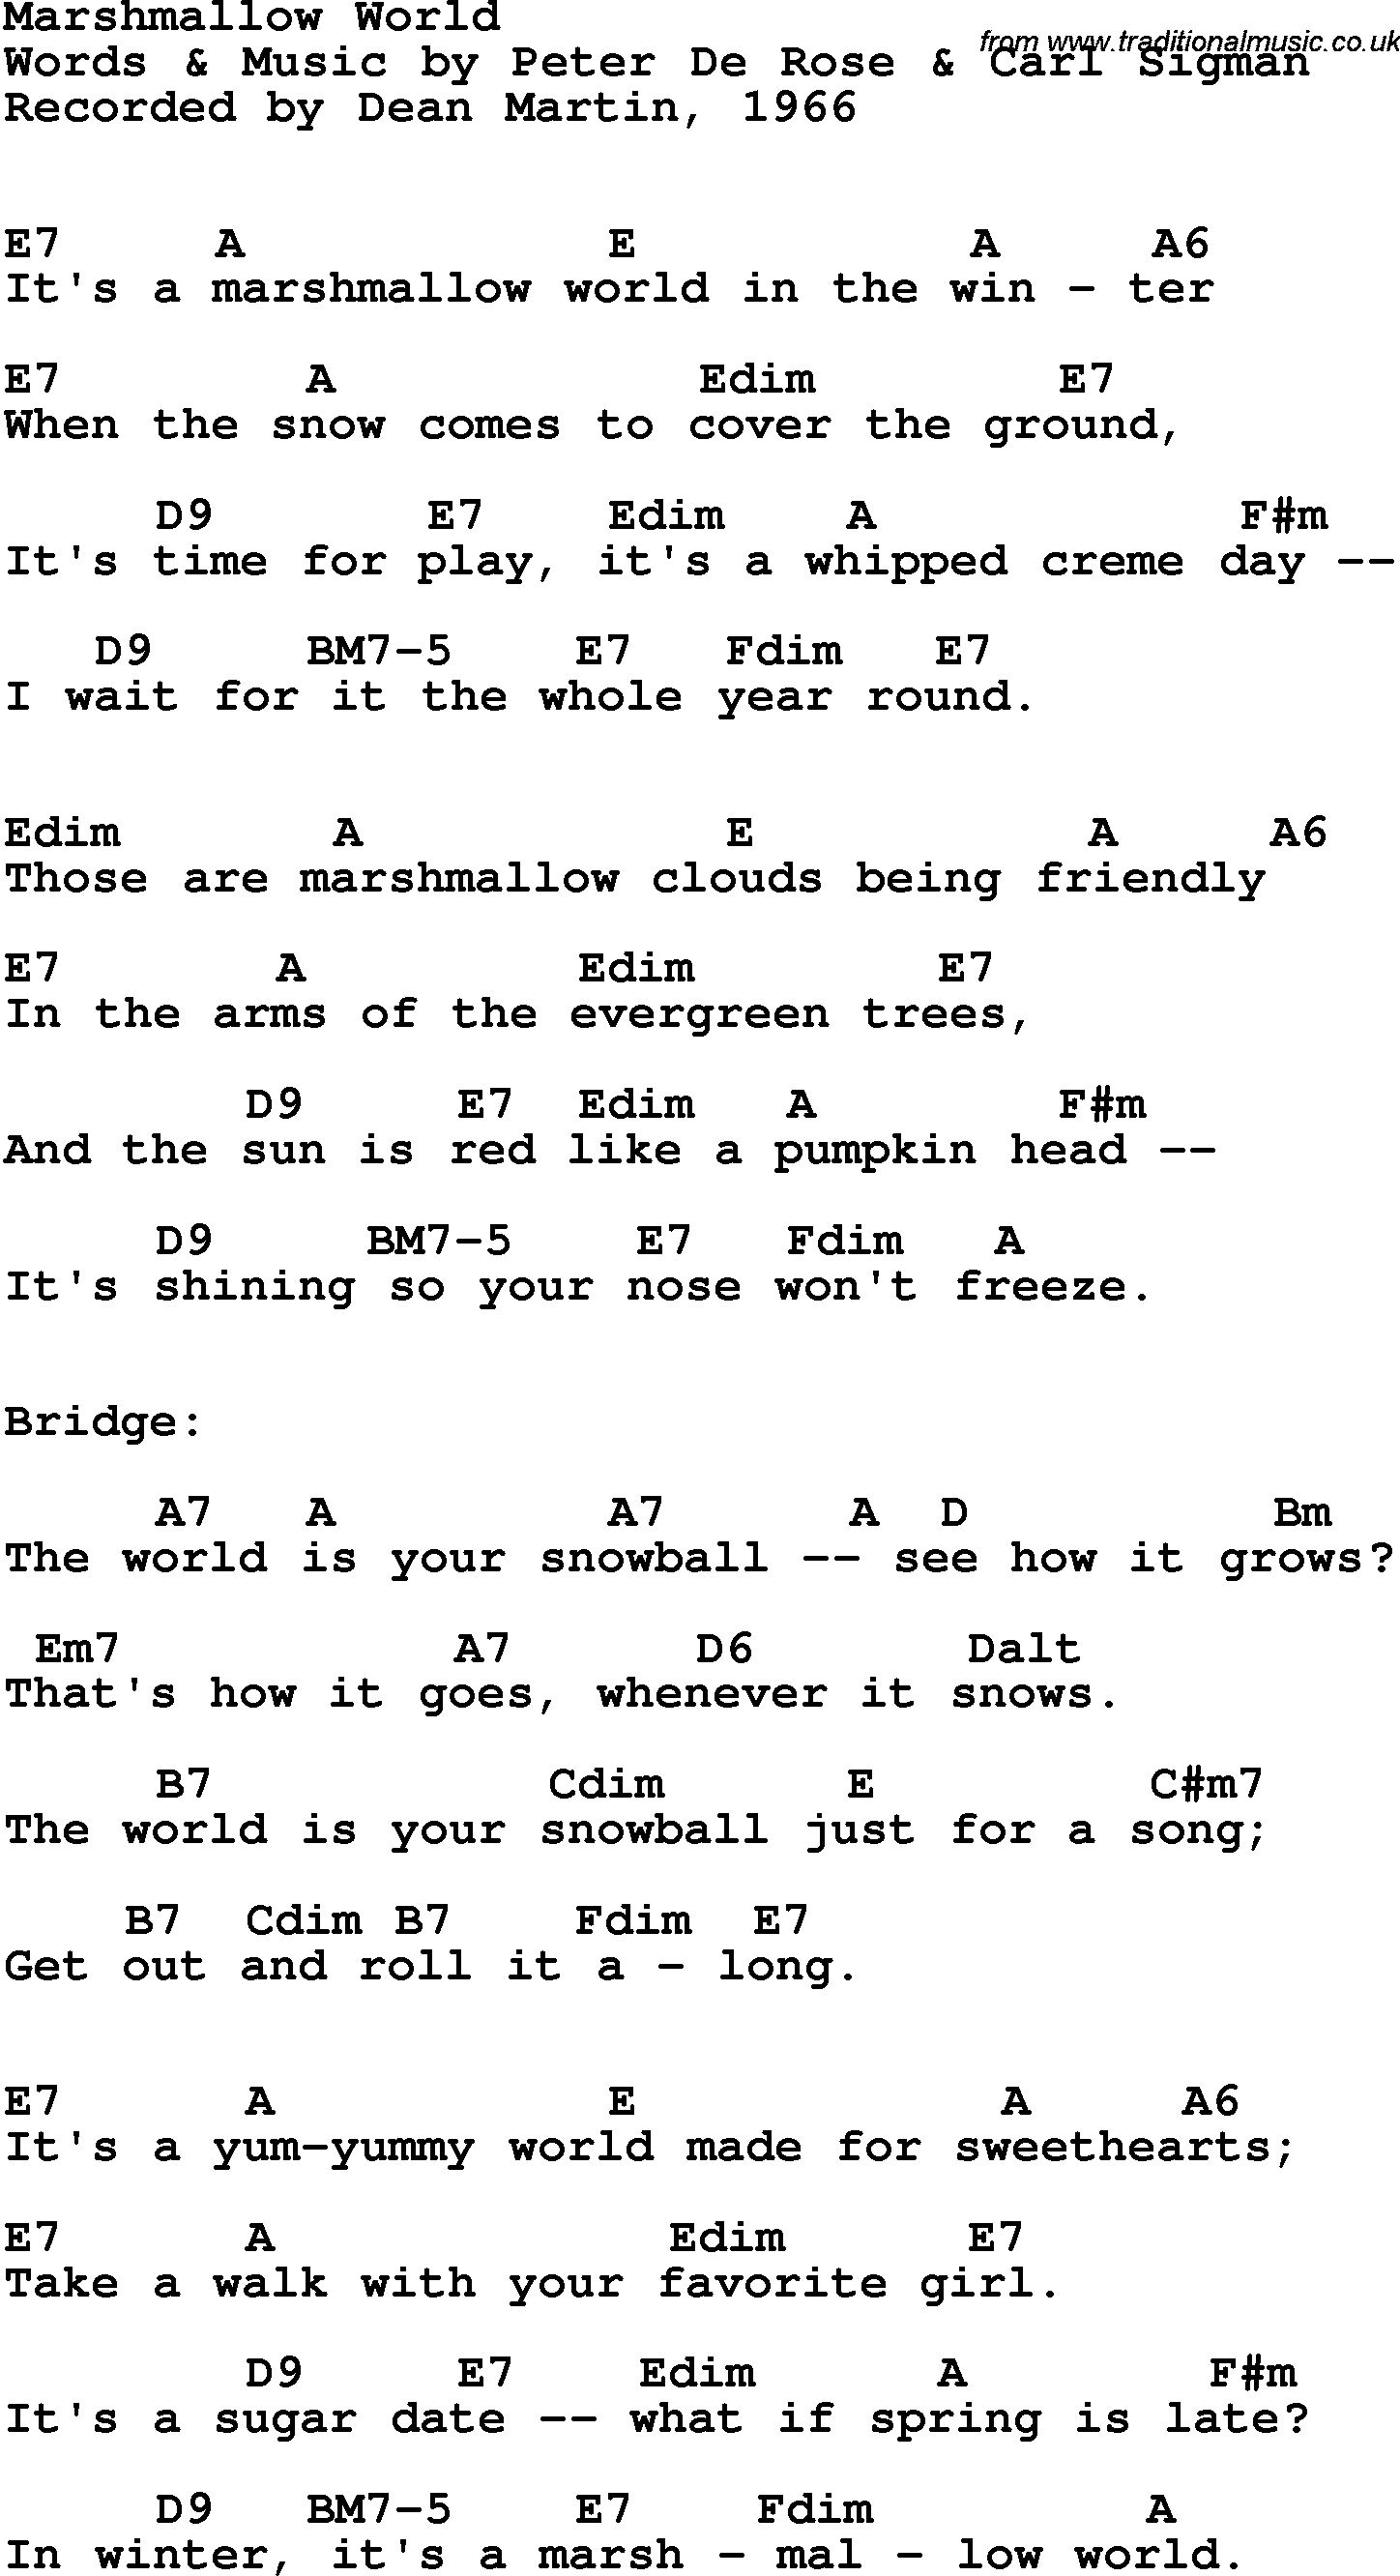 Song Lyrics with guitar chords for Marshmallow World - Dean Martin, 1966